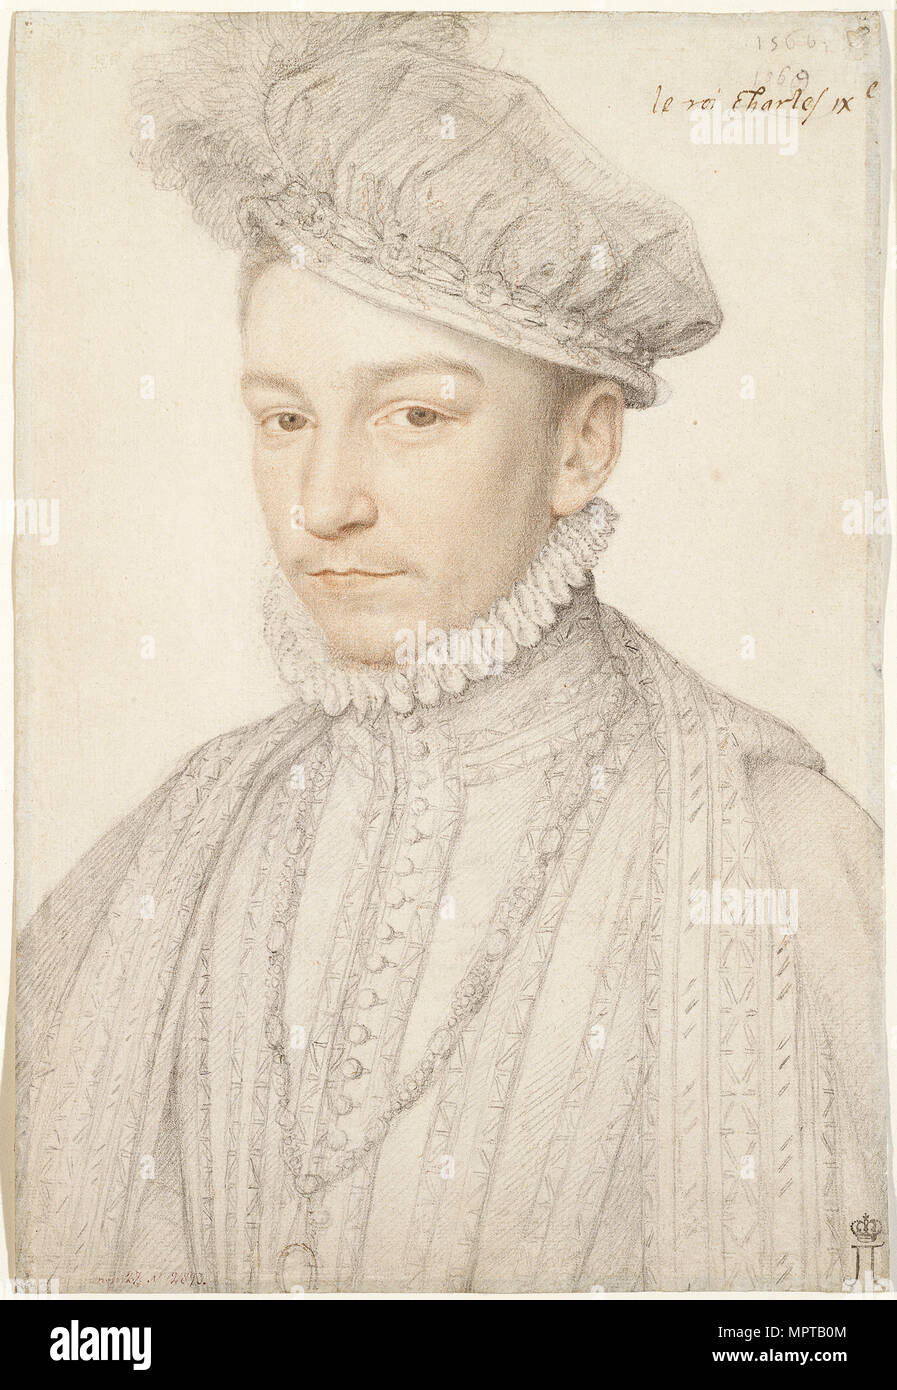 Portrait of King Charles IX of France (1550-1574). Stock Photo